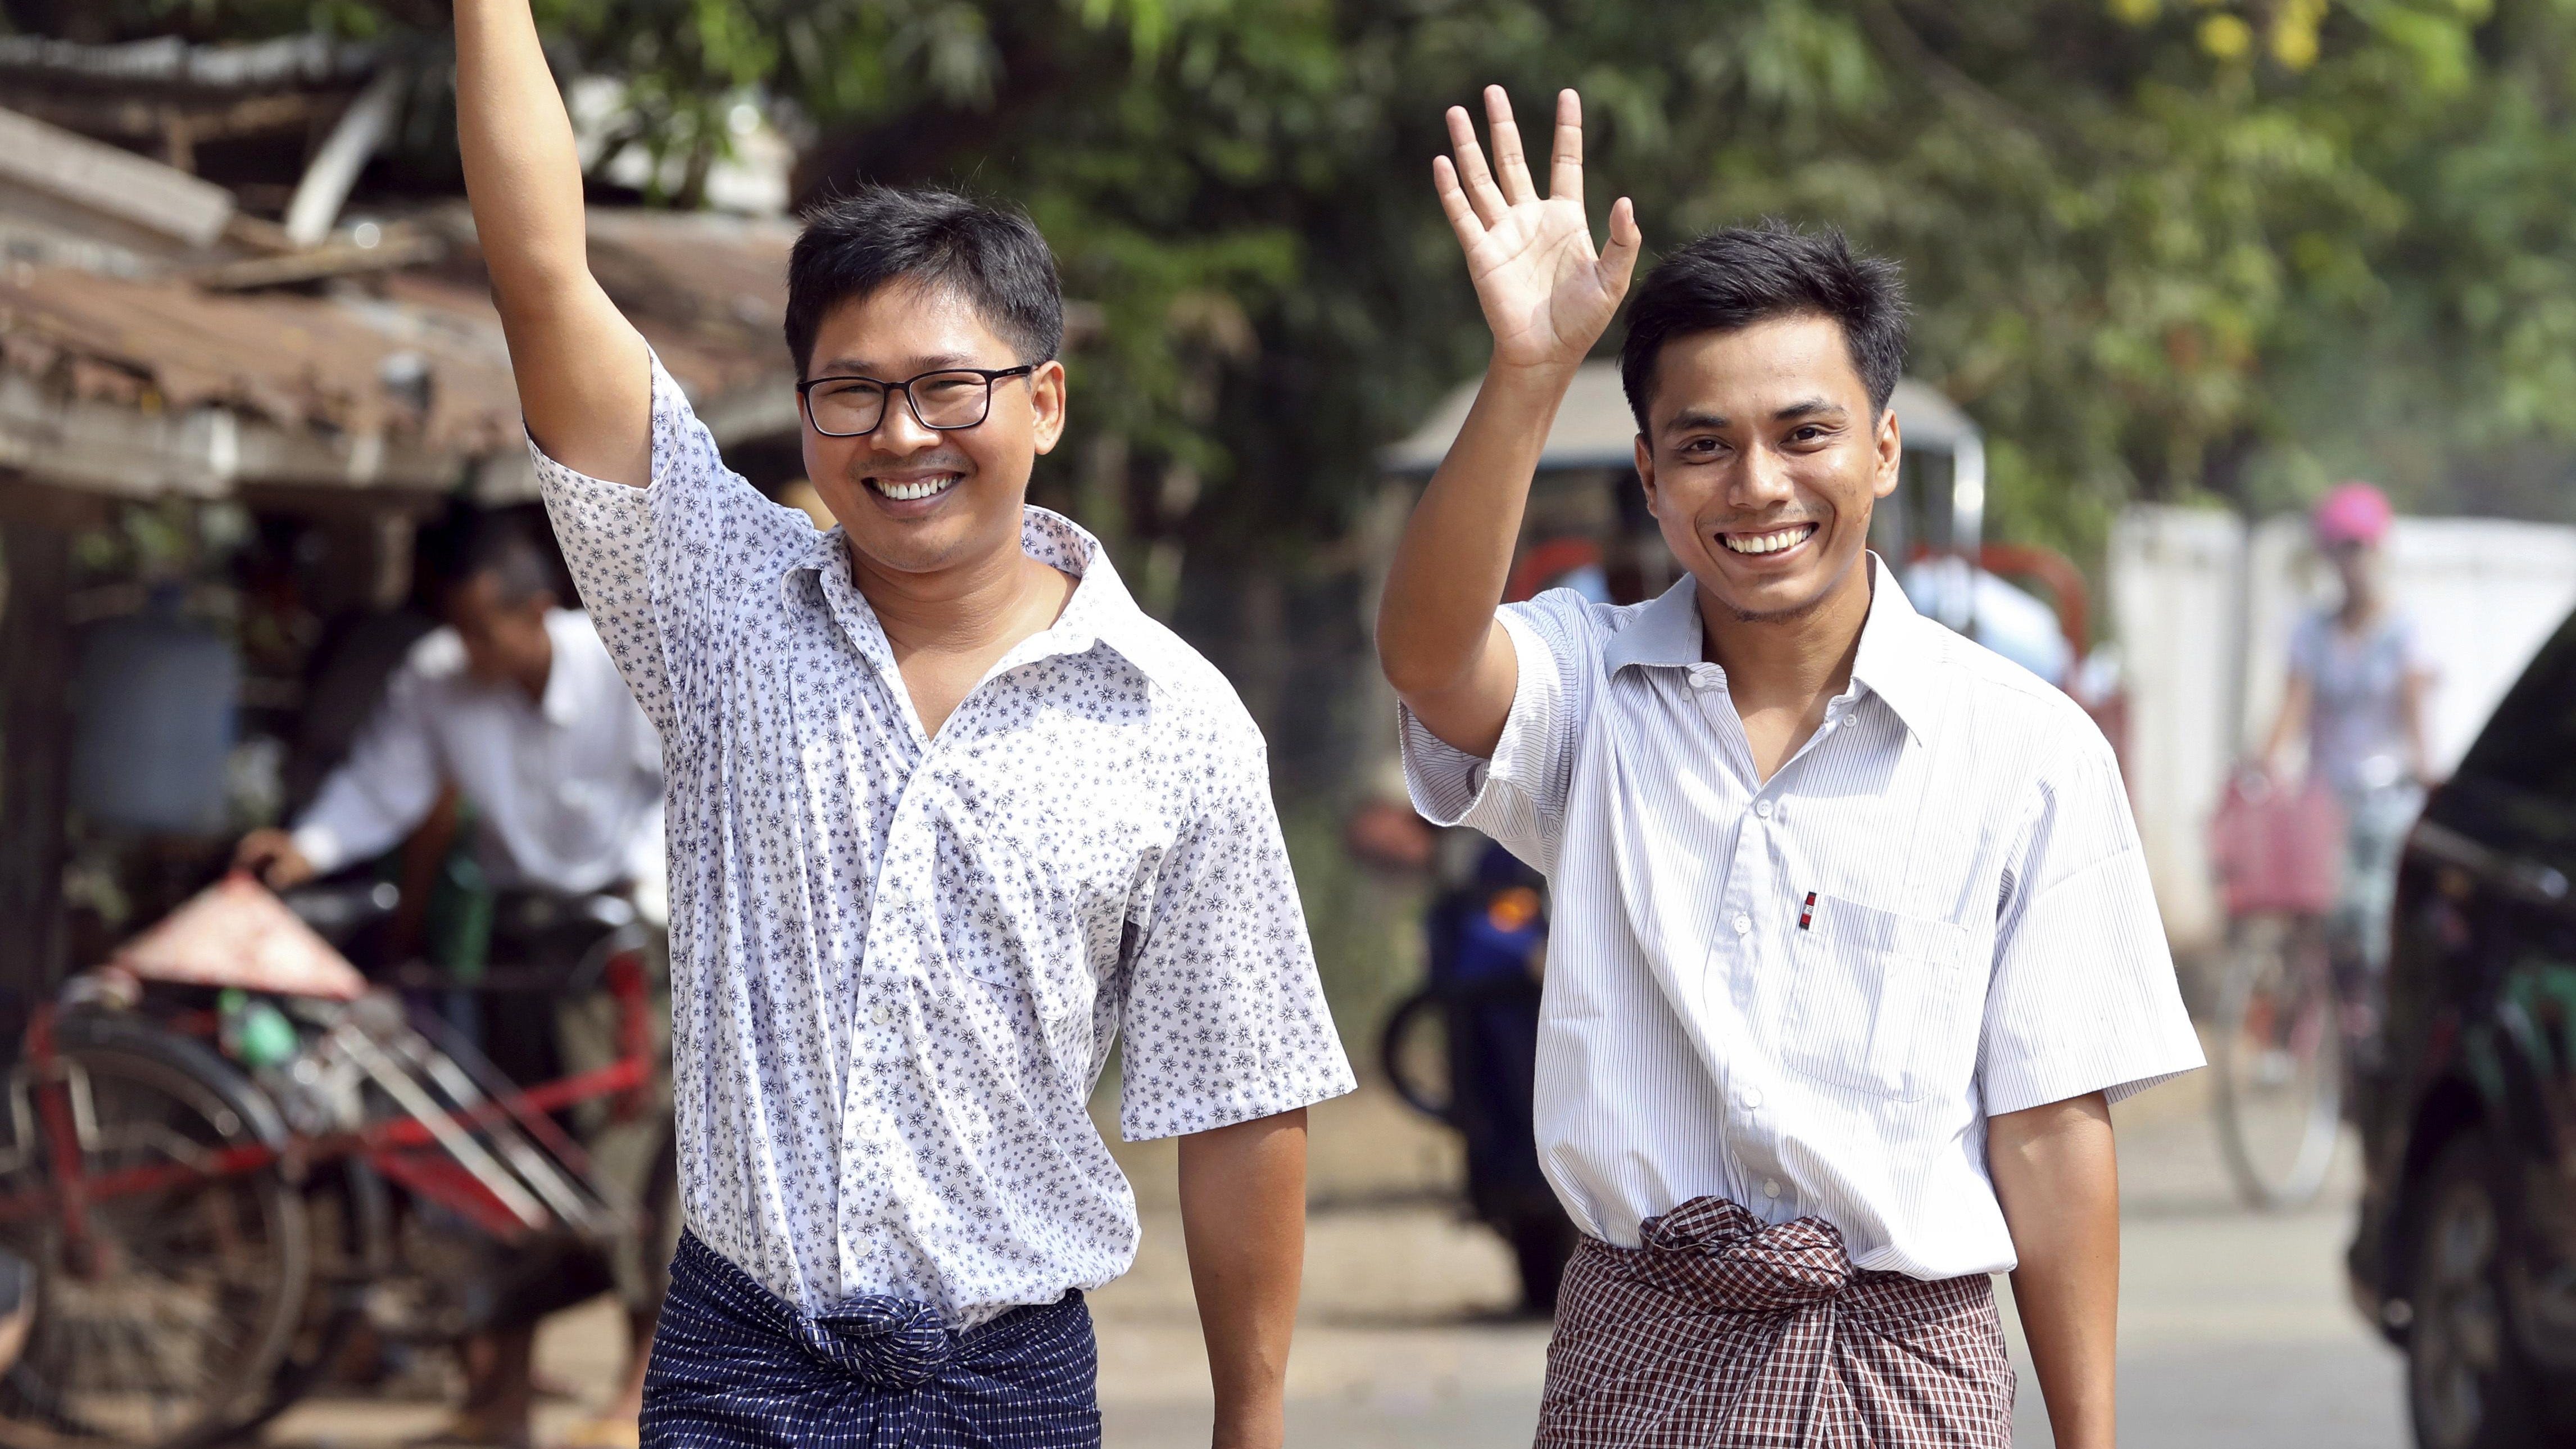 Reuters reporters Wa Lone, left, and Kyaw Soe Oo walk through the Insein Prison gate after being freed, in Yangon, Myanmar, Tuesday, May 7, 2019.